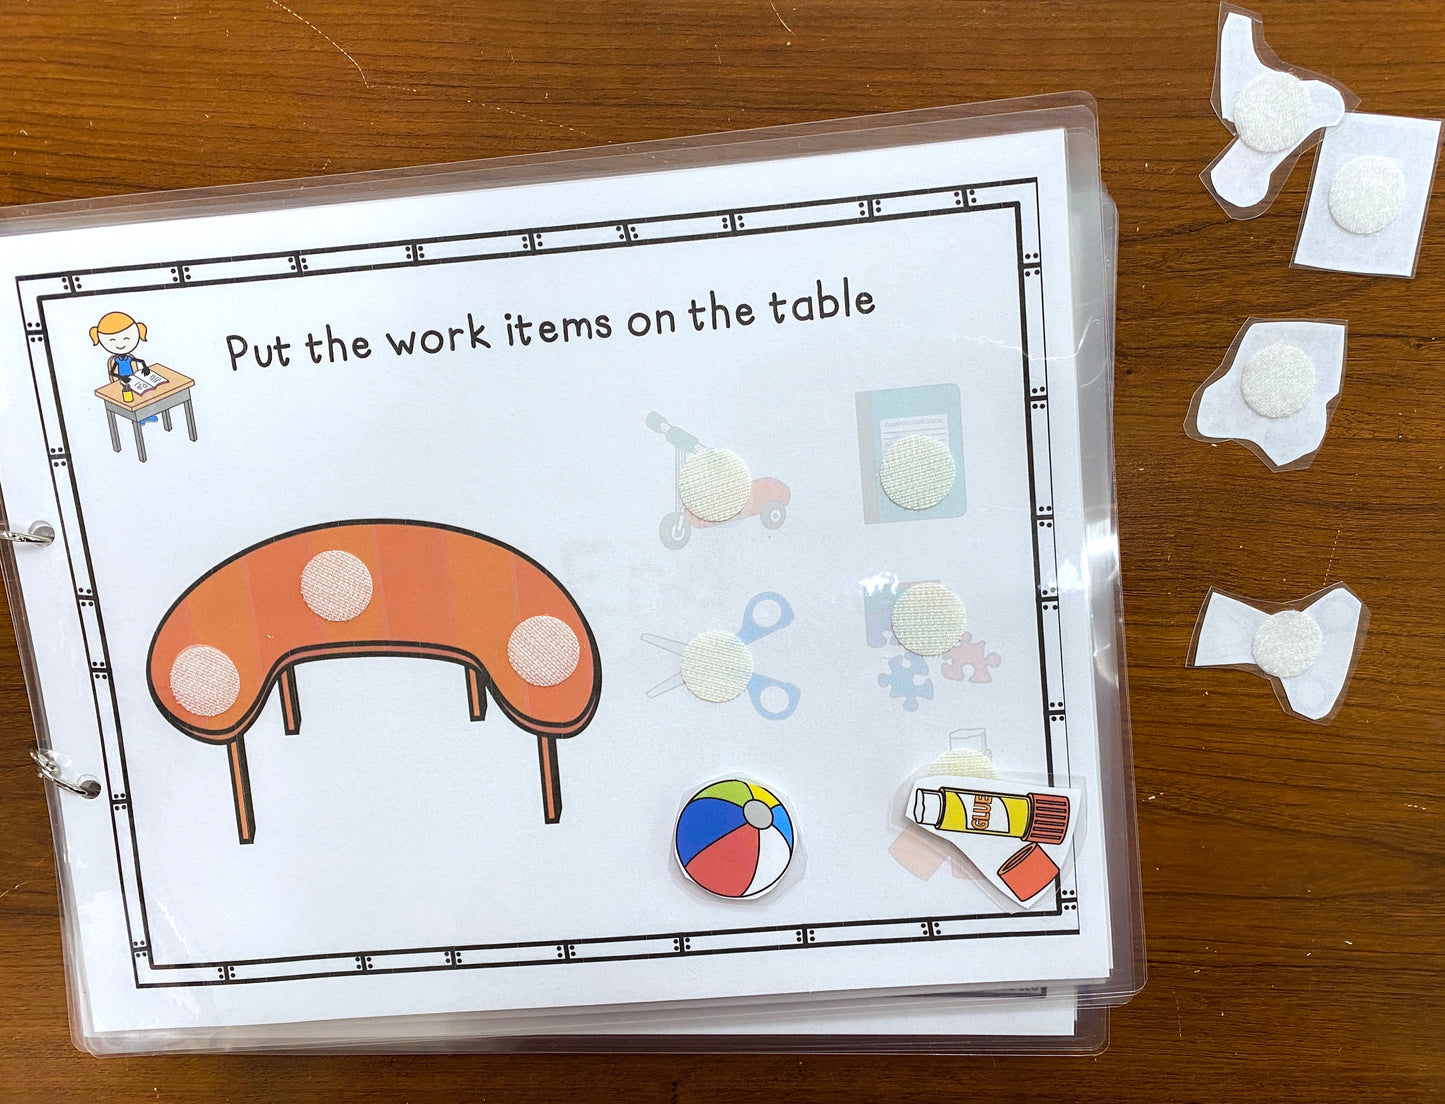 Functional Vocabulary Book: Work or Play?  Print & Make Book